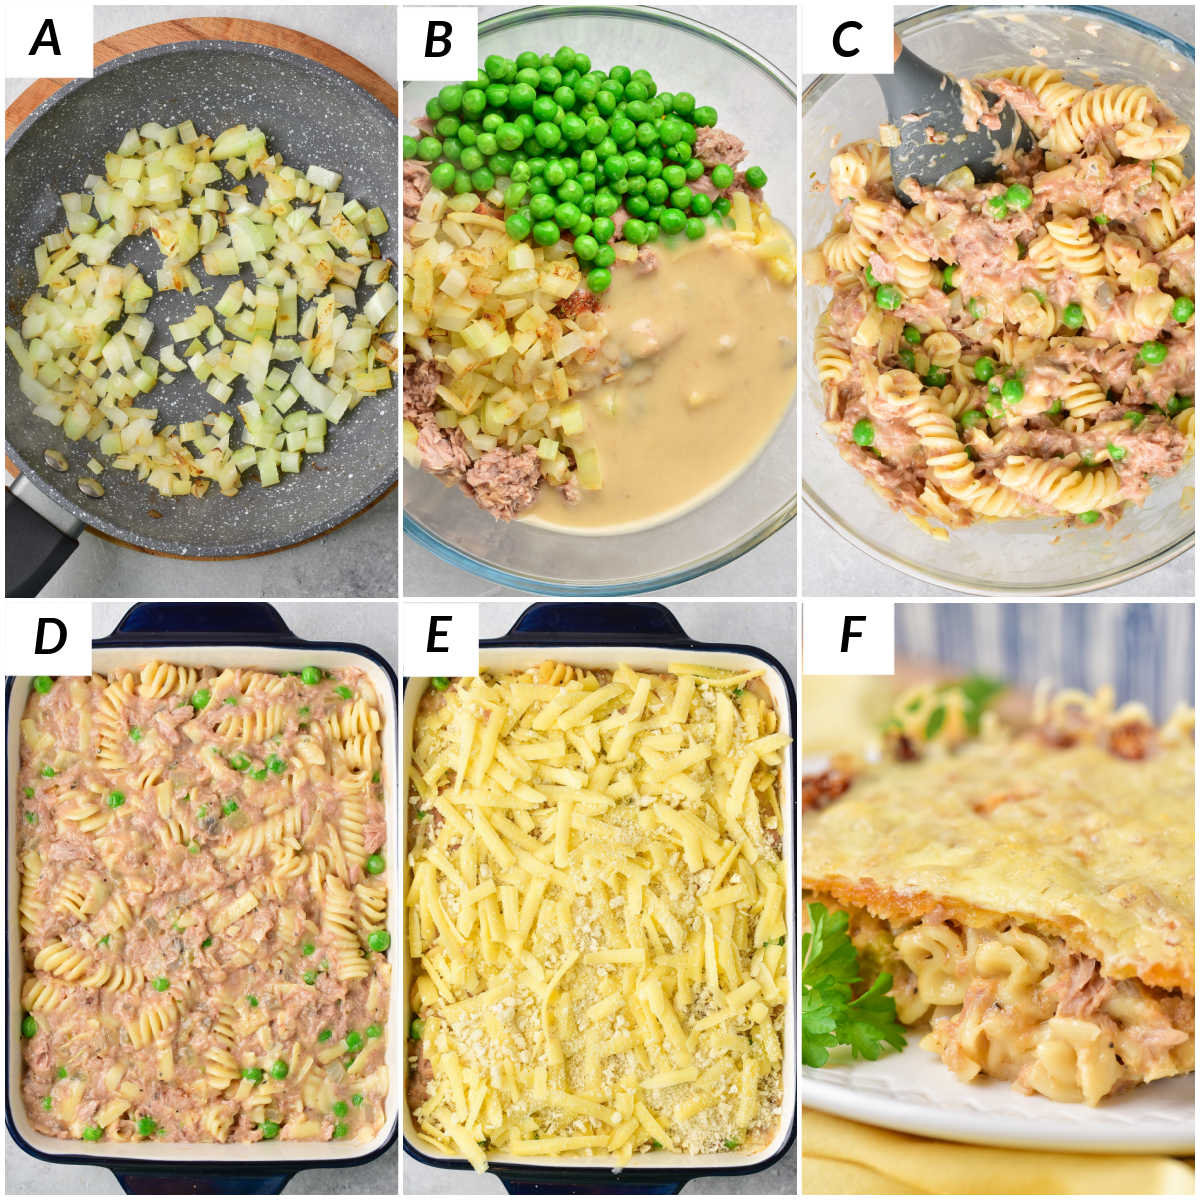 image collage showing the steps for making cheesy tuna casserole with green peas